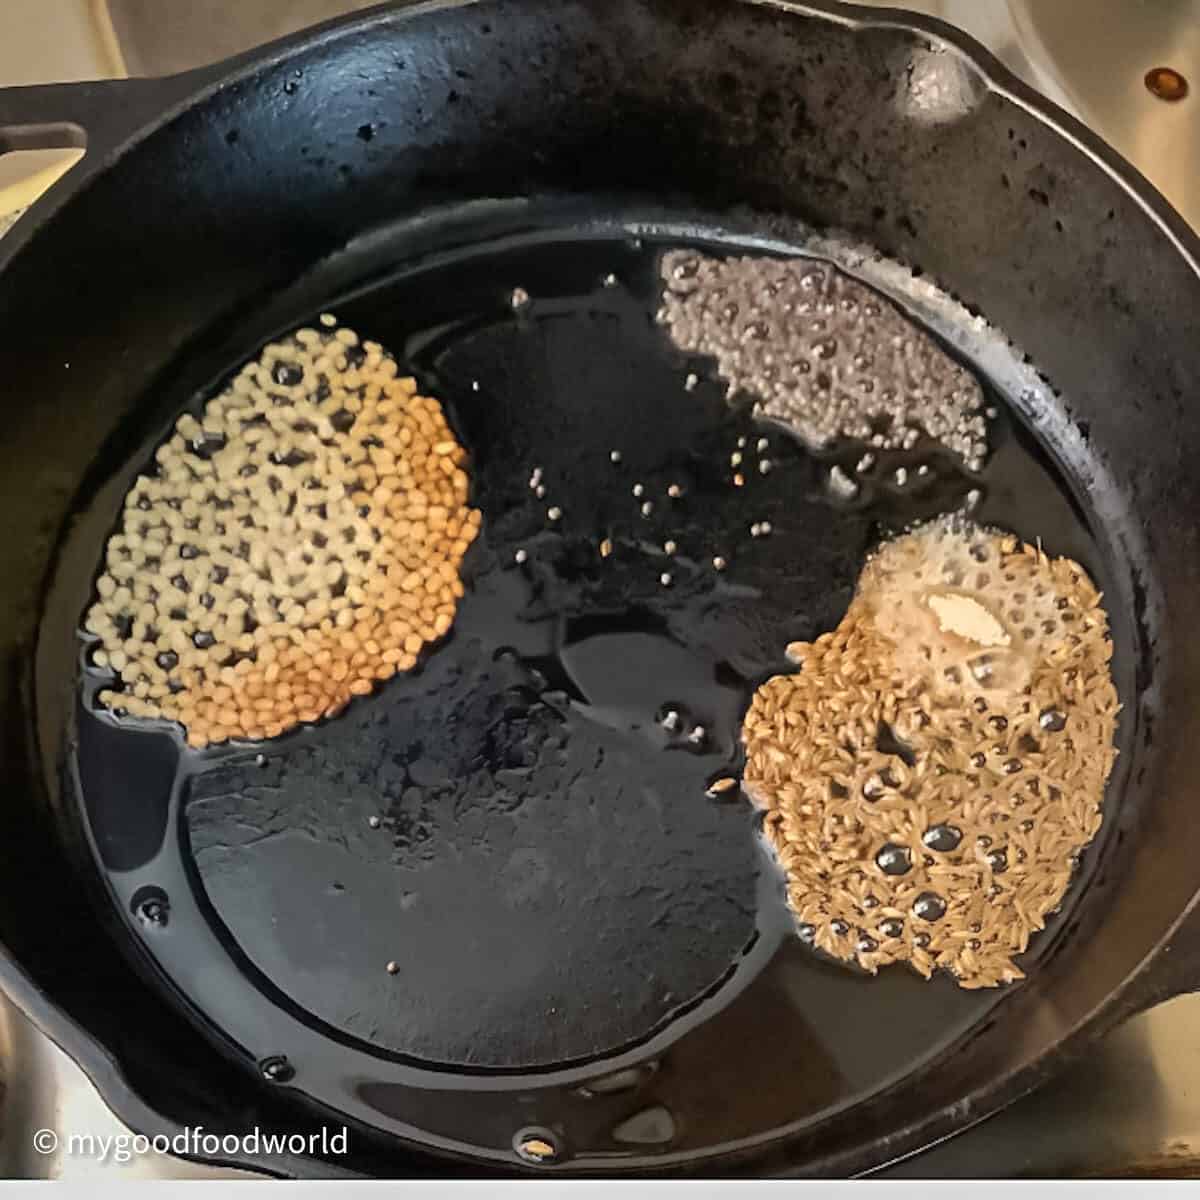 Lentils, cumin and mustard seeds frying in oil in a black colored cast iron pan.